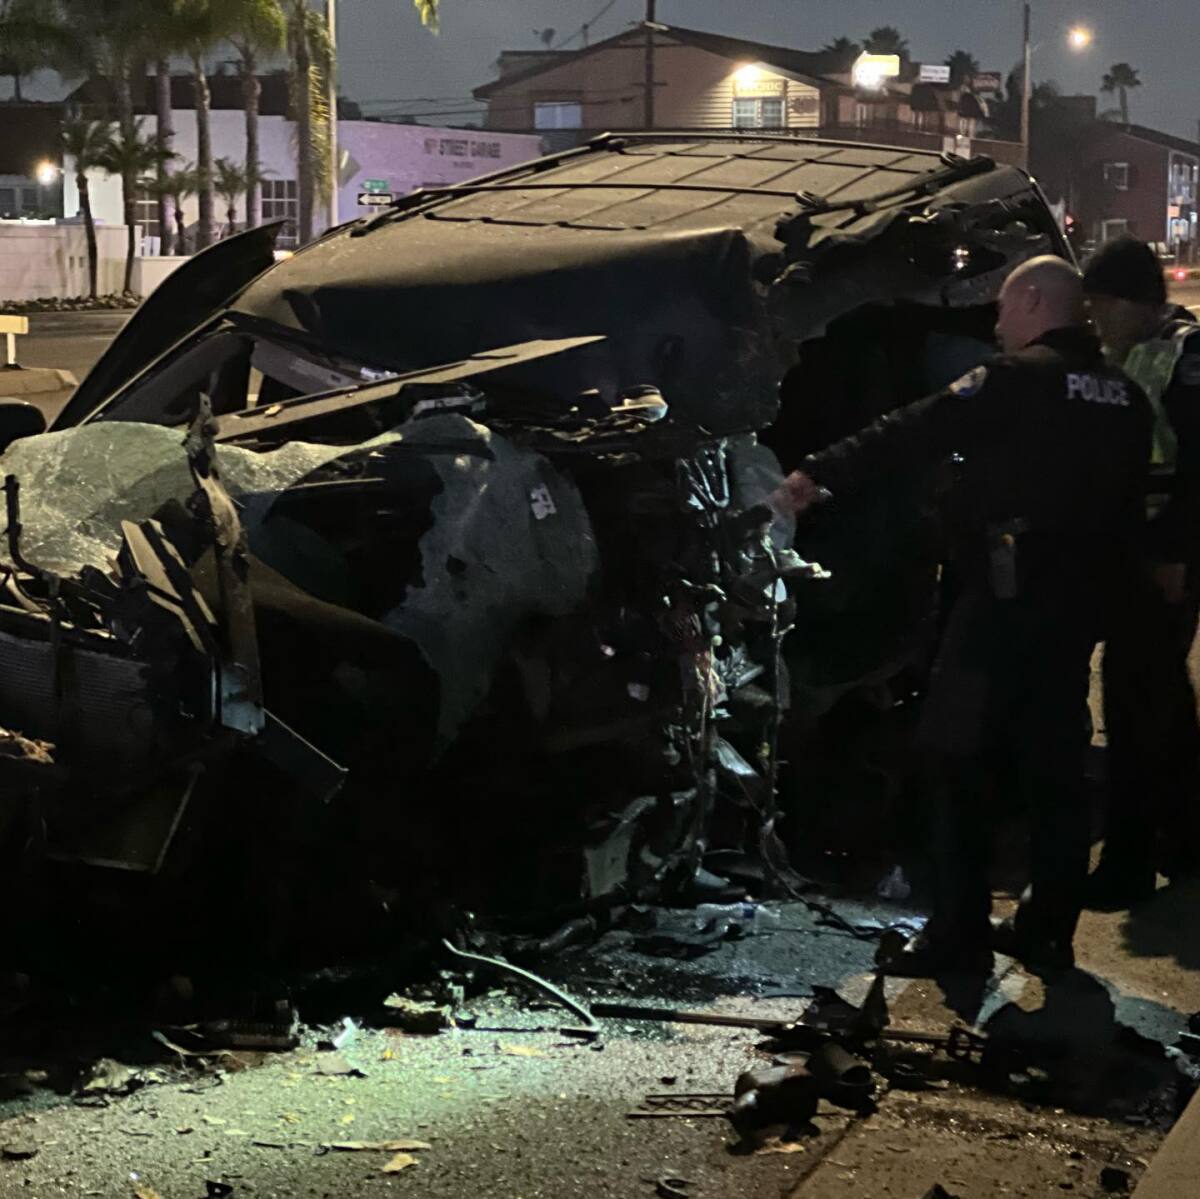 Two individuals were pinned inside a vehicle that crashed into a tree on PCH near Seal Beach Boulevard early Sunday.